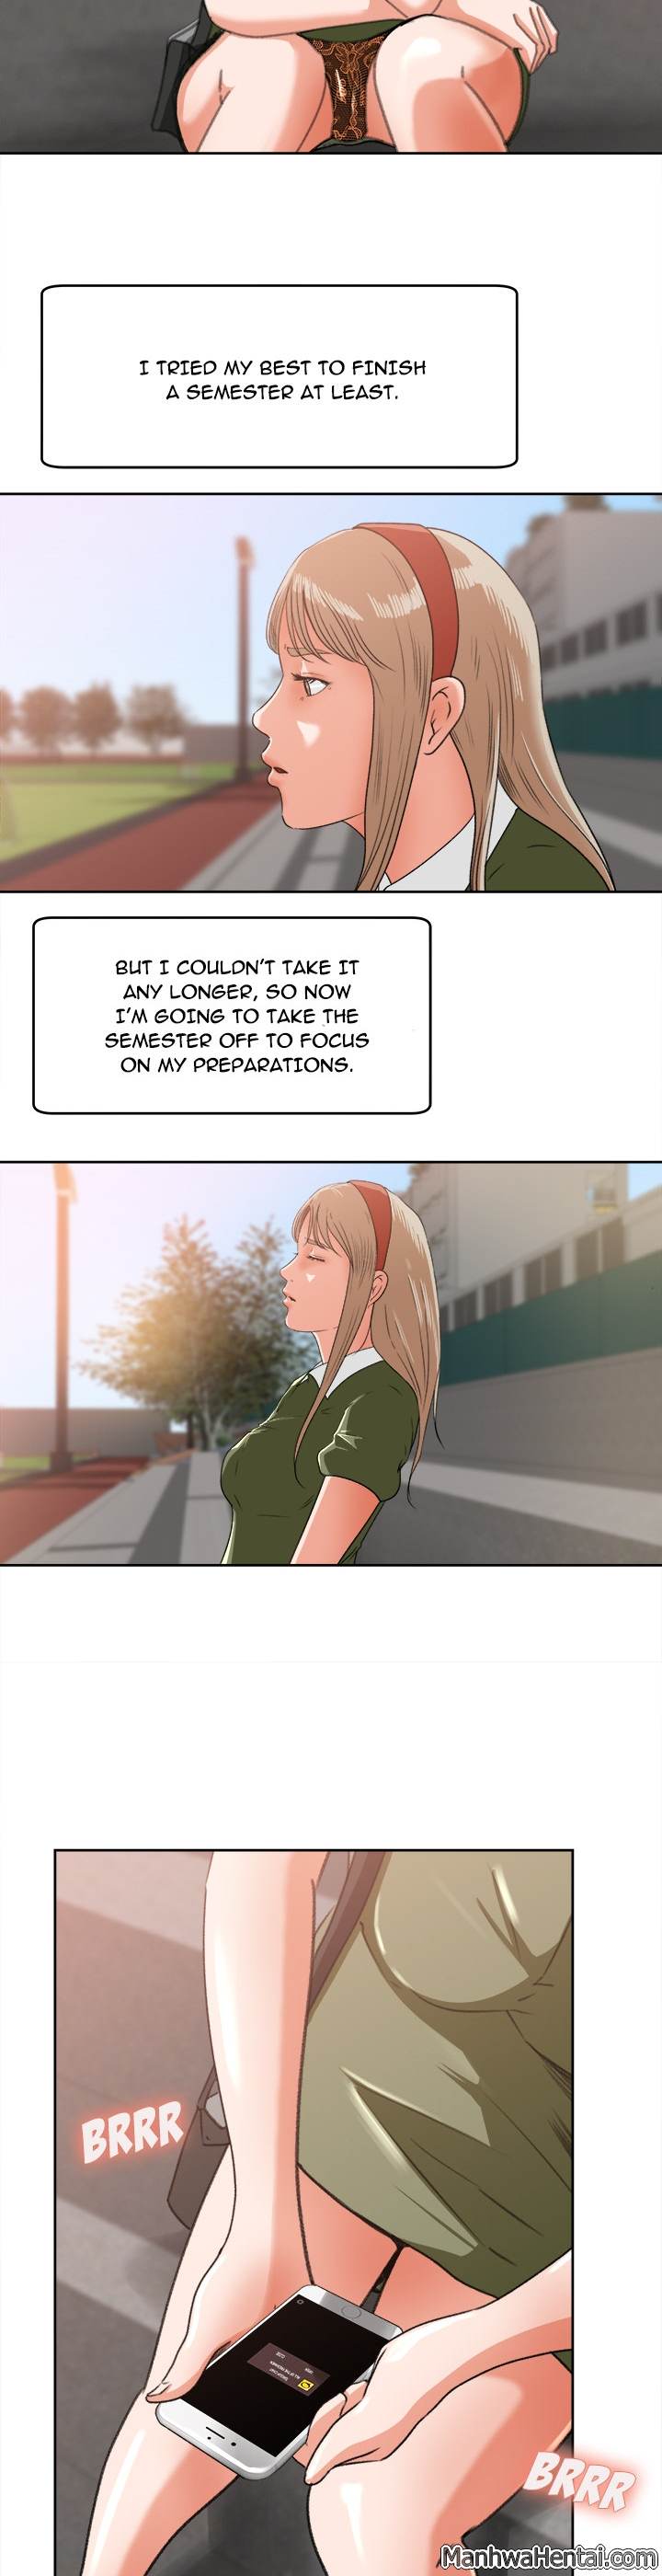 Inside the Uniform - Chapter 3 Page 6